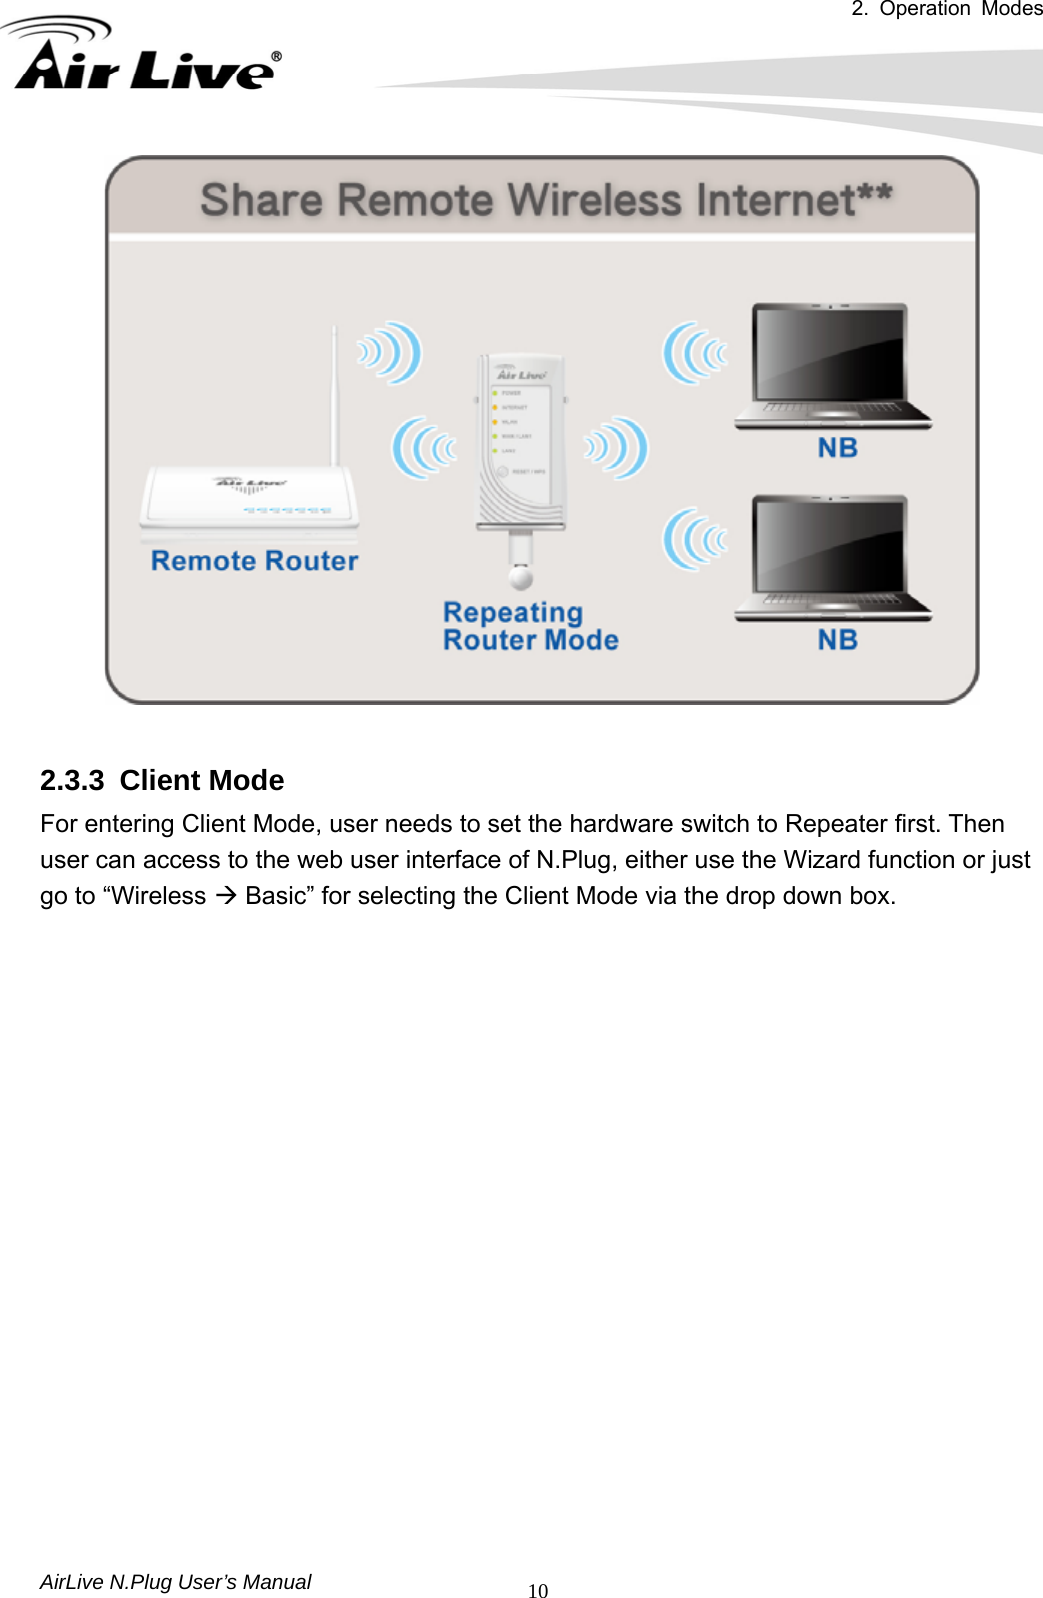 2. Operation Modes  AirLive N.Plug User’s Manual  10  2.3.3 Client Mode For entering Client Mode, user needs to set the hardware switch to Repeater first. Then user can access to the web user interface of N.Plug, either use the Wizard function or just go to “Wireless Æ Basic” for selecting the Client Mode via the drop down box.   